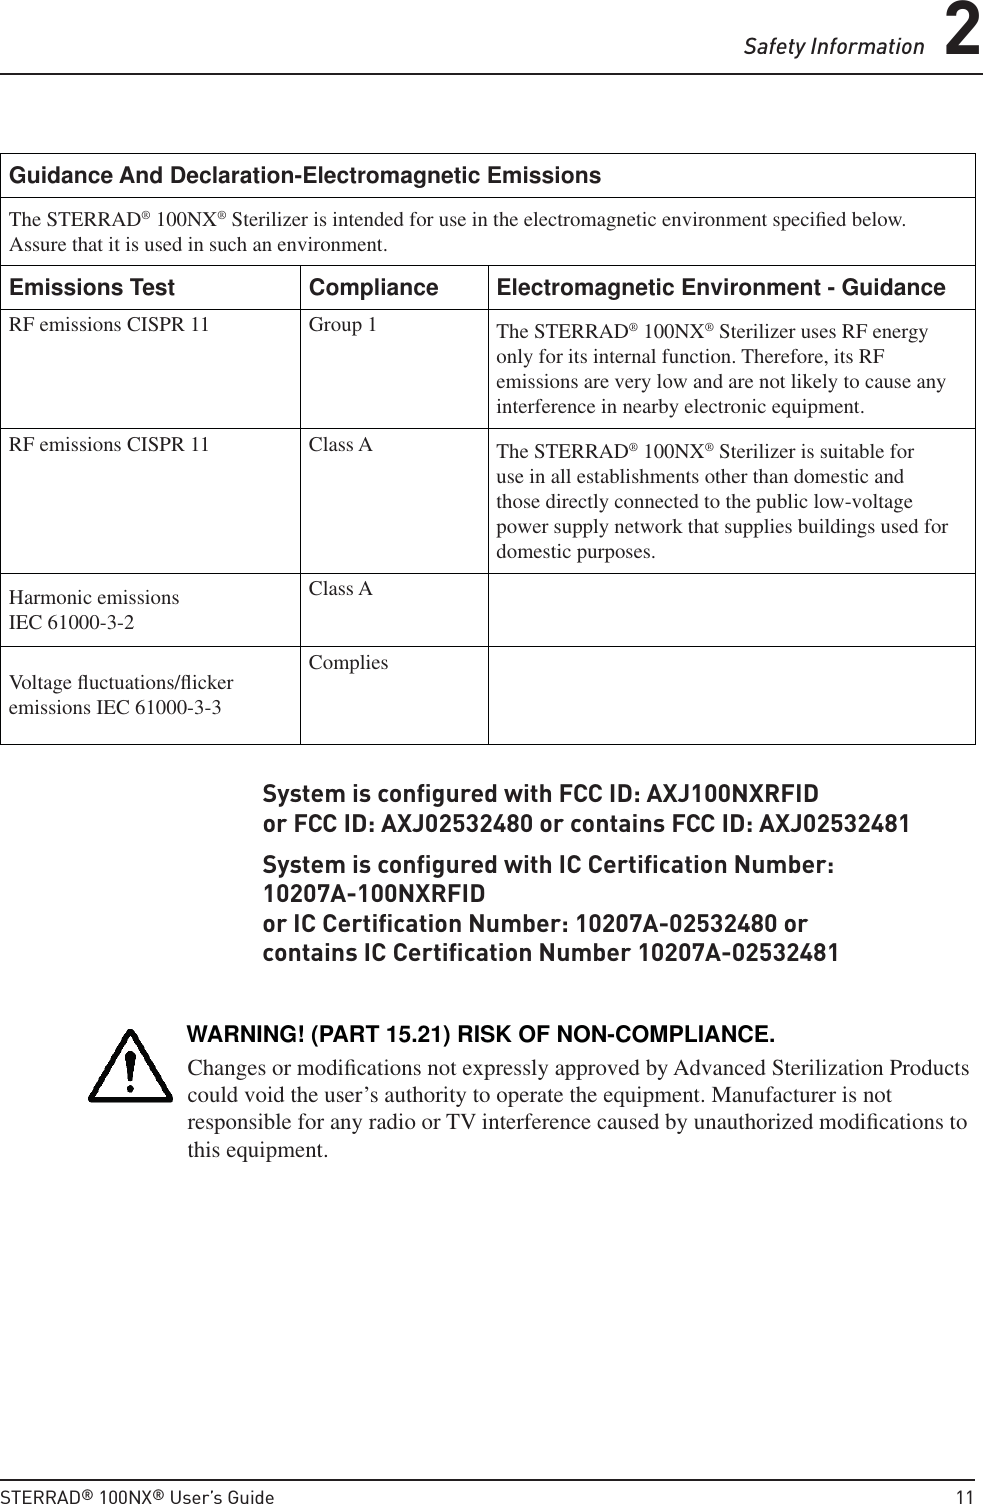 Safety Information 2STERRAD® 100NX® User’s Guide  11Guidance And Declaration-Electromagnetic EmissionsThe STERRAD® 100NX® Sterilizer is intended for use in the electromagnetic environment speciﬁ ed below. Assure that it is used in such an environment.Emissions Test Compliance Electromagnetic Environment - GuidanceRF emissions CISPR 11 Group 1 The STERRAD® 100NX® Sterilizer uses RF energy only for its internal function. Therefore, its RF emissions are very low and are not likely to cause any interference in nearby electronic equipment.RF emissions CISPR 11 Class A The STERRAD® 100NX® Sterilizer is suitable for use in all establishments other than domestic and those directly connected to the public low-voltage power supply network that supplies buildings used for domestic purposes.Harmonic emissions IEC 61000-3-2Class AVoltage ﬂ uctuations/ﬂ icker emissions IEC 61000-3-3CompliesSystem is conﬁ gured with FCC ID: AXJ100NXRFID or FCC ID: AXJ02532480 or contains FCC ID: AXJ02532481System is conﬁ gured with IC Certiﬁ cation Number:  10207A-100NXRFID or IC Certiﬁ cation Number: 10207A-02532480 or contains IC Certiﬁ cation Number 10207A-02532481WARNING! (PART 15.21) RISK OF NON-COMPLIANCE.Changes or modiﬁ cations not expressly approved by Advanced Sterilization Products could void the user’s authority to operate the equipment. Manufacturer is not responsible for any radio or TV interference caused by unauthorized modiﬁ cations to this equipment. 